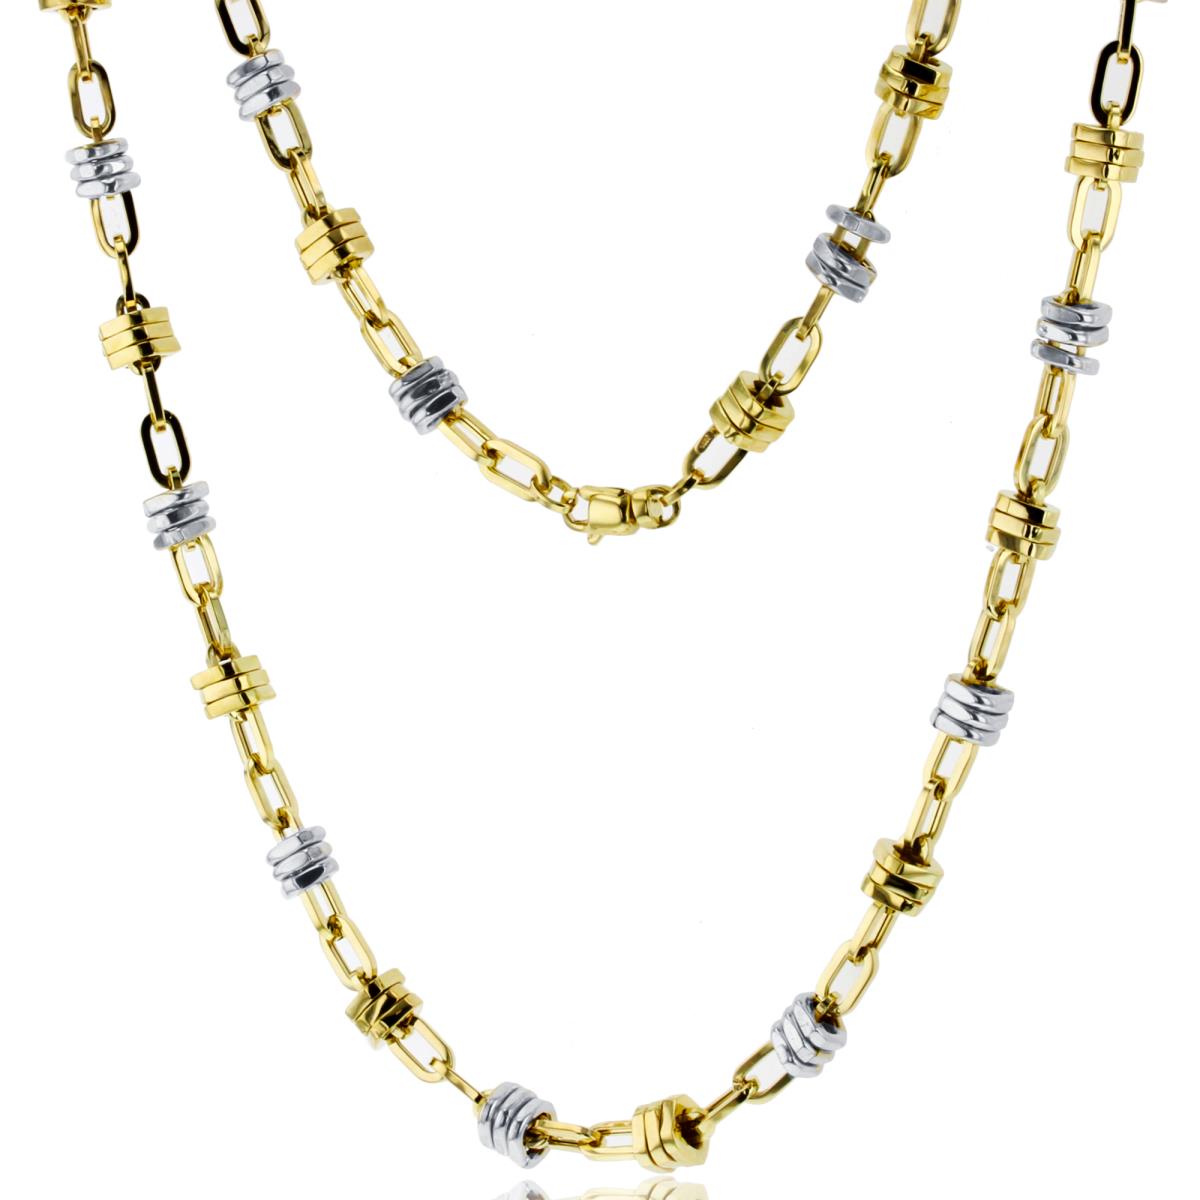 10K Two-Tone Gold Polished Fancy Squared Links 24" Chain